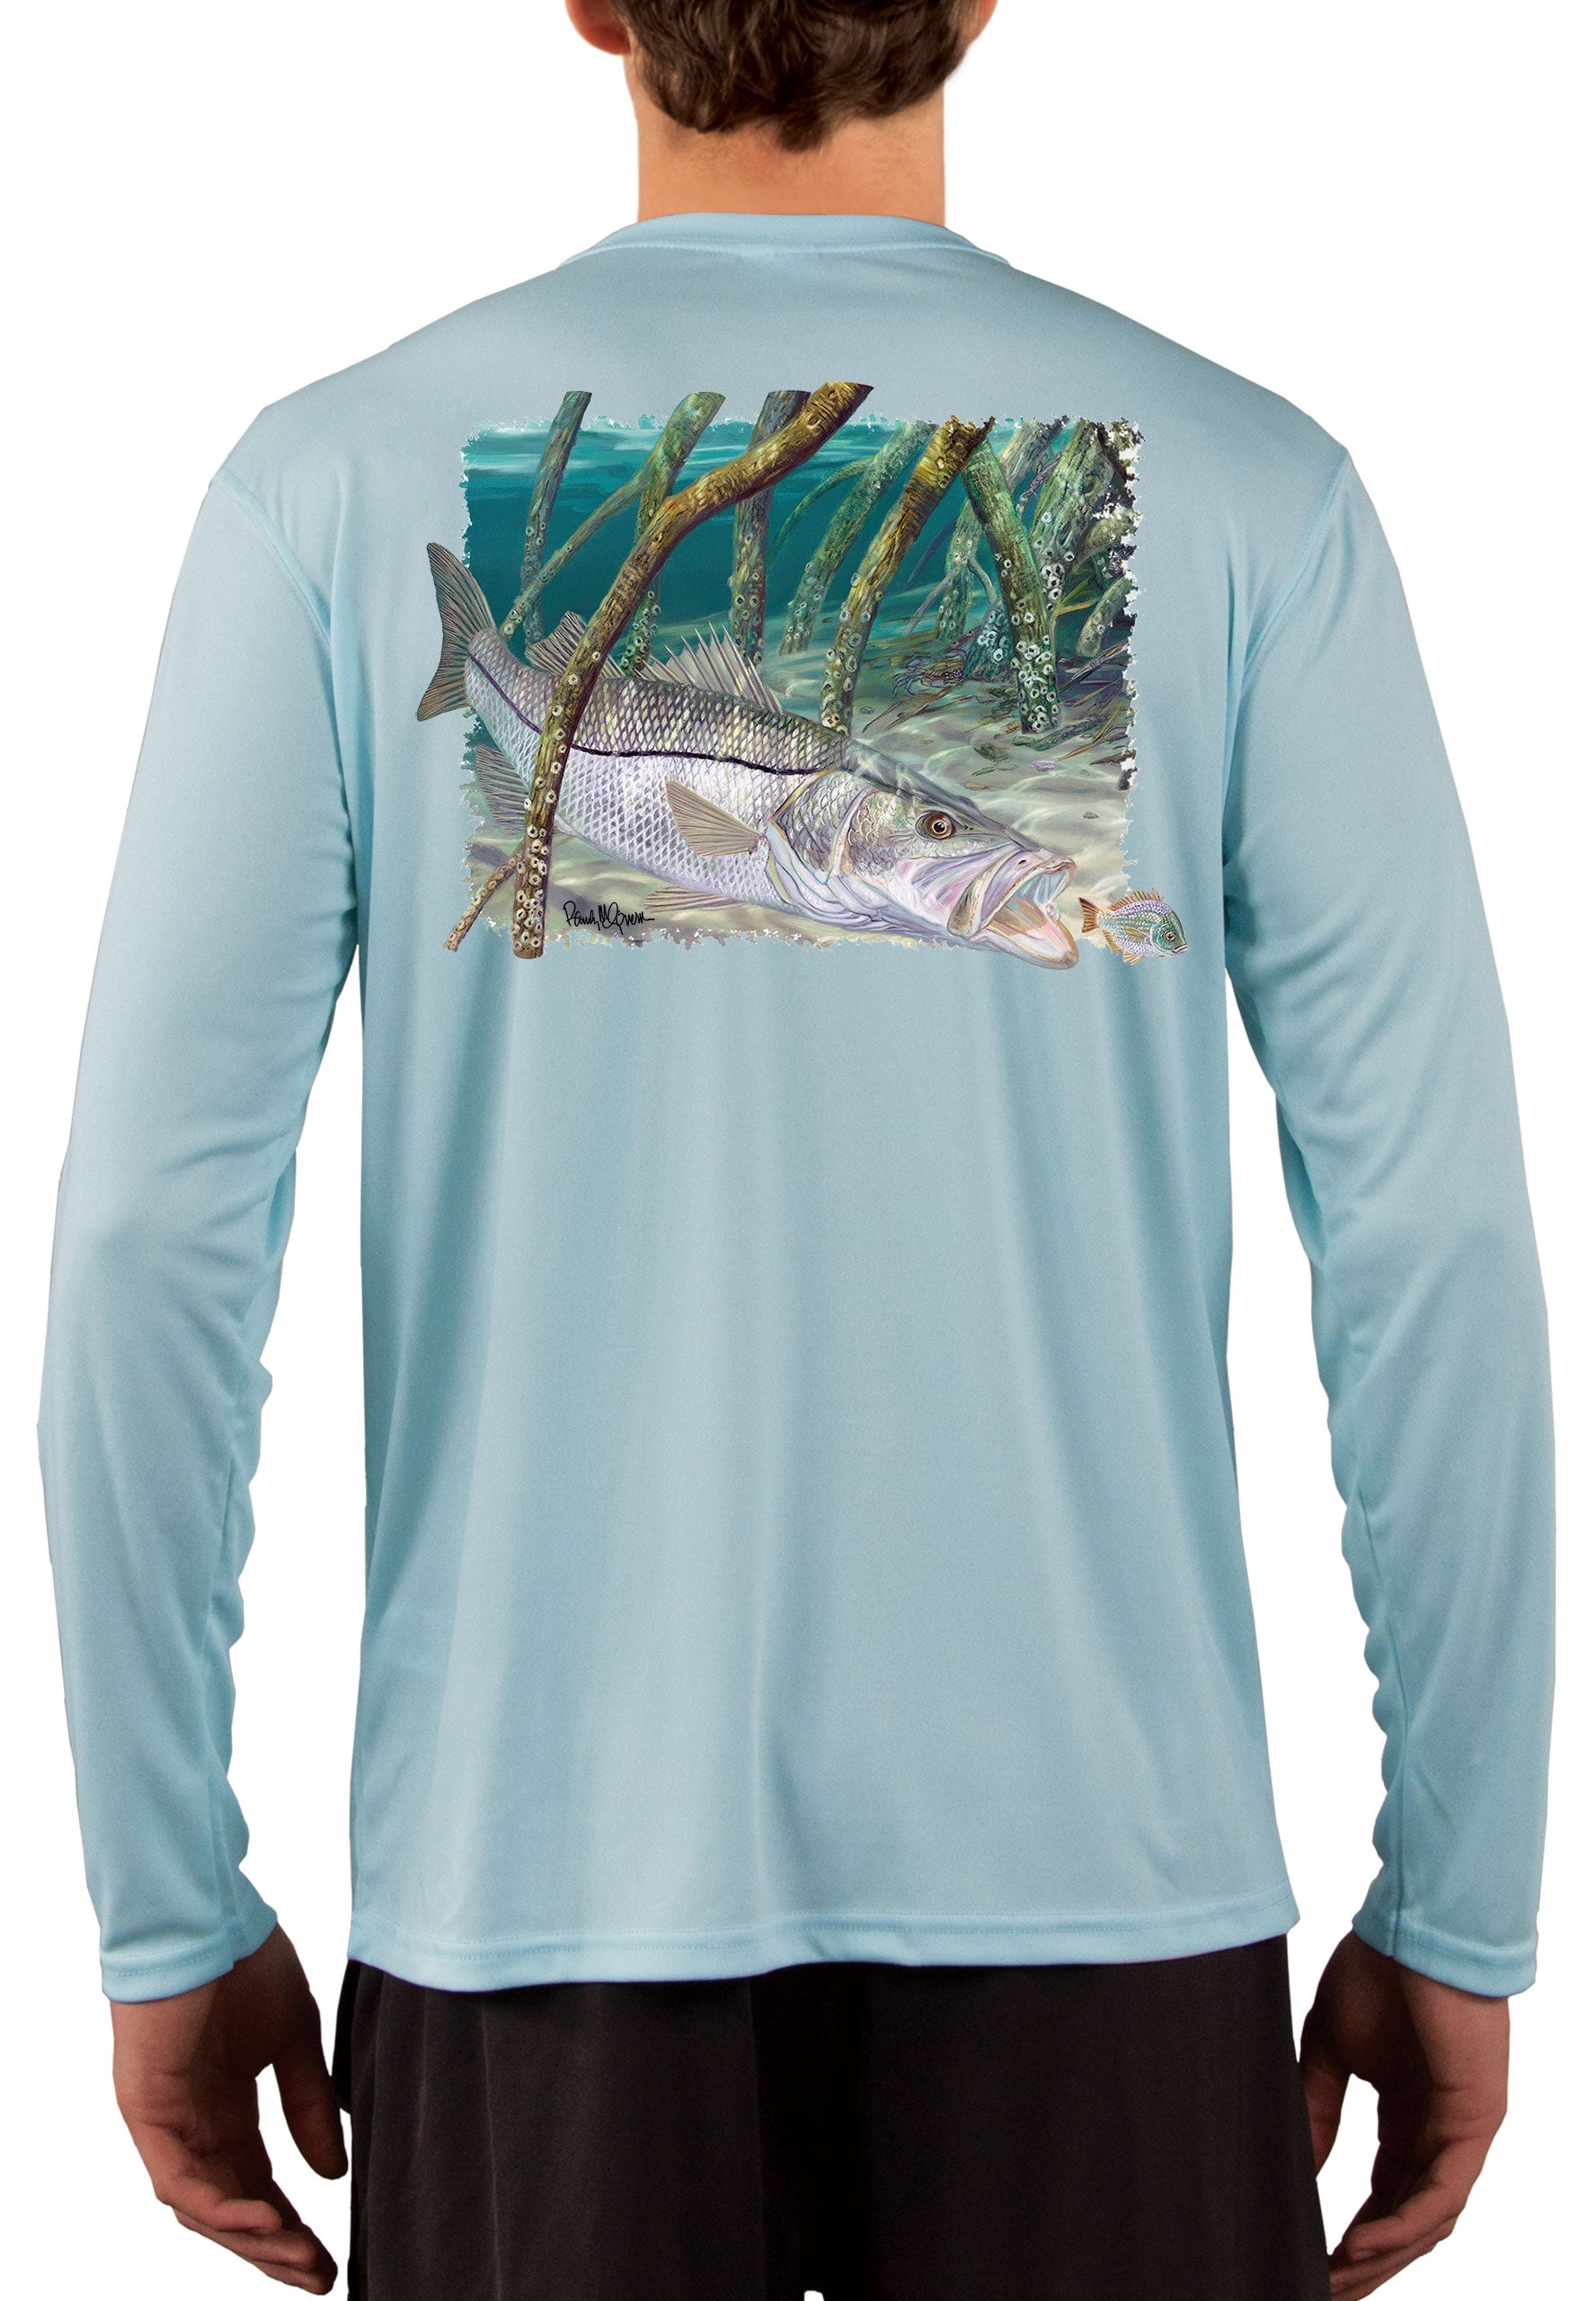 Fishing Shirts for Men Snook Fish in Mangroves by Award Winning Artist Randy McGovern Ice Blue / 3XL